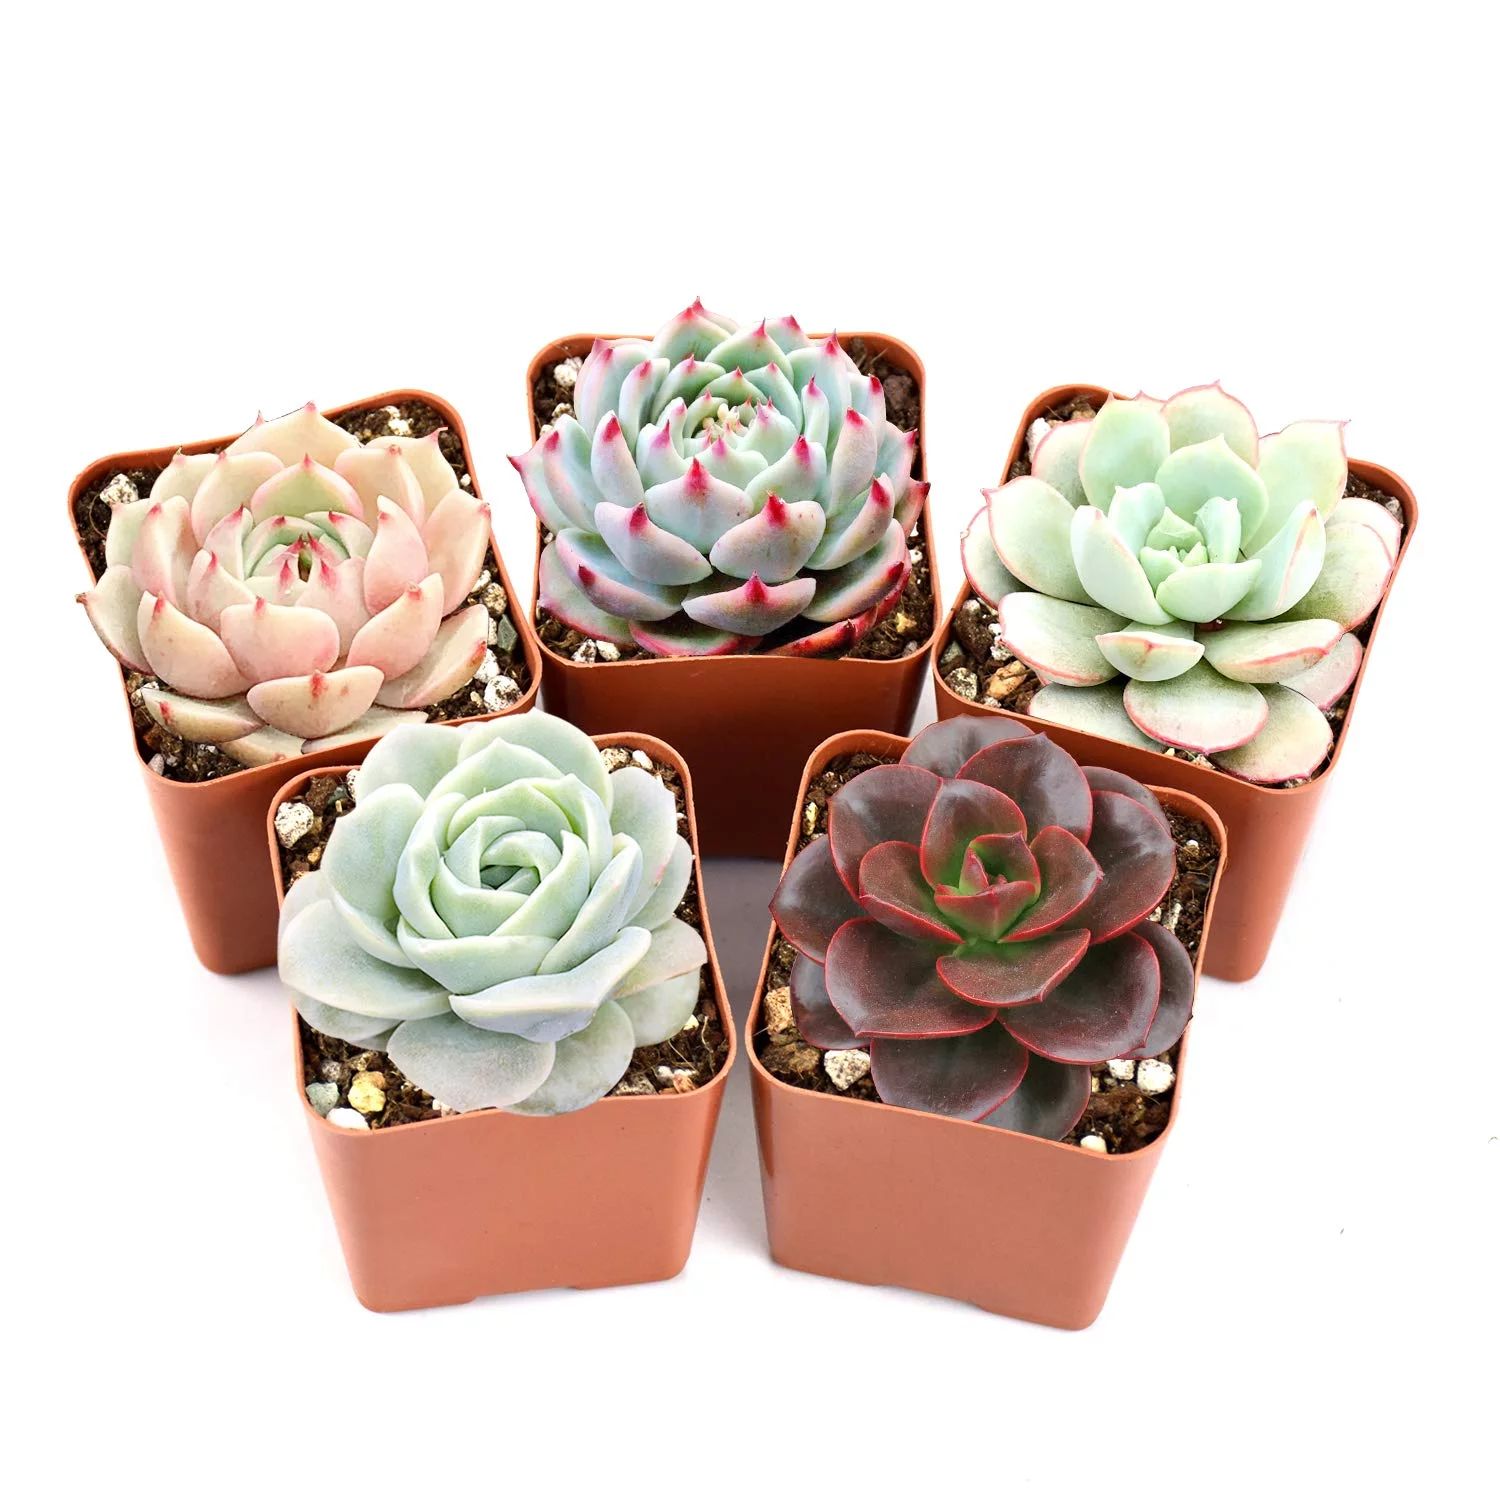 Live Succulent Plants, 5 Assorted Rare Succulents Rooted in 2" Planter | Walmart (US)